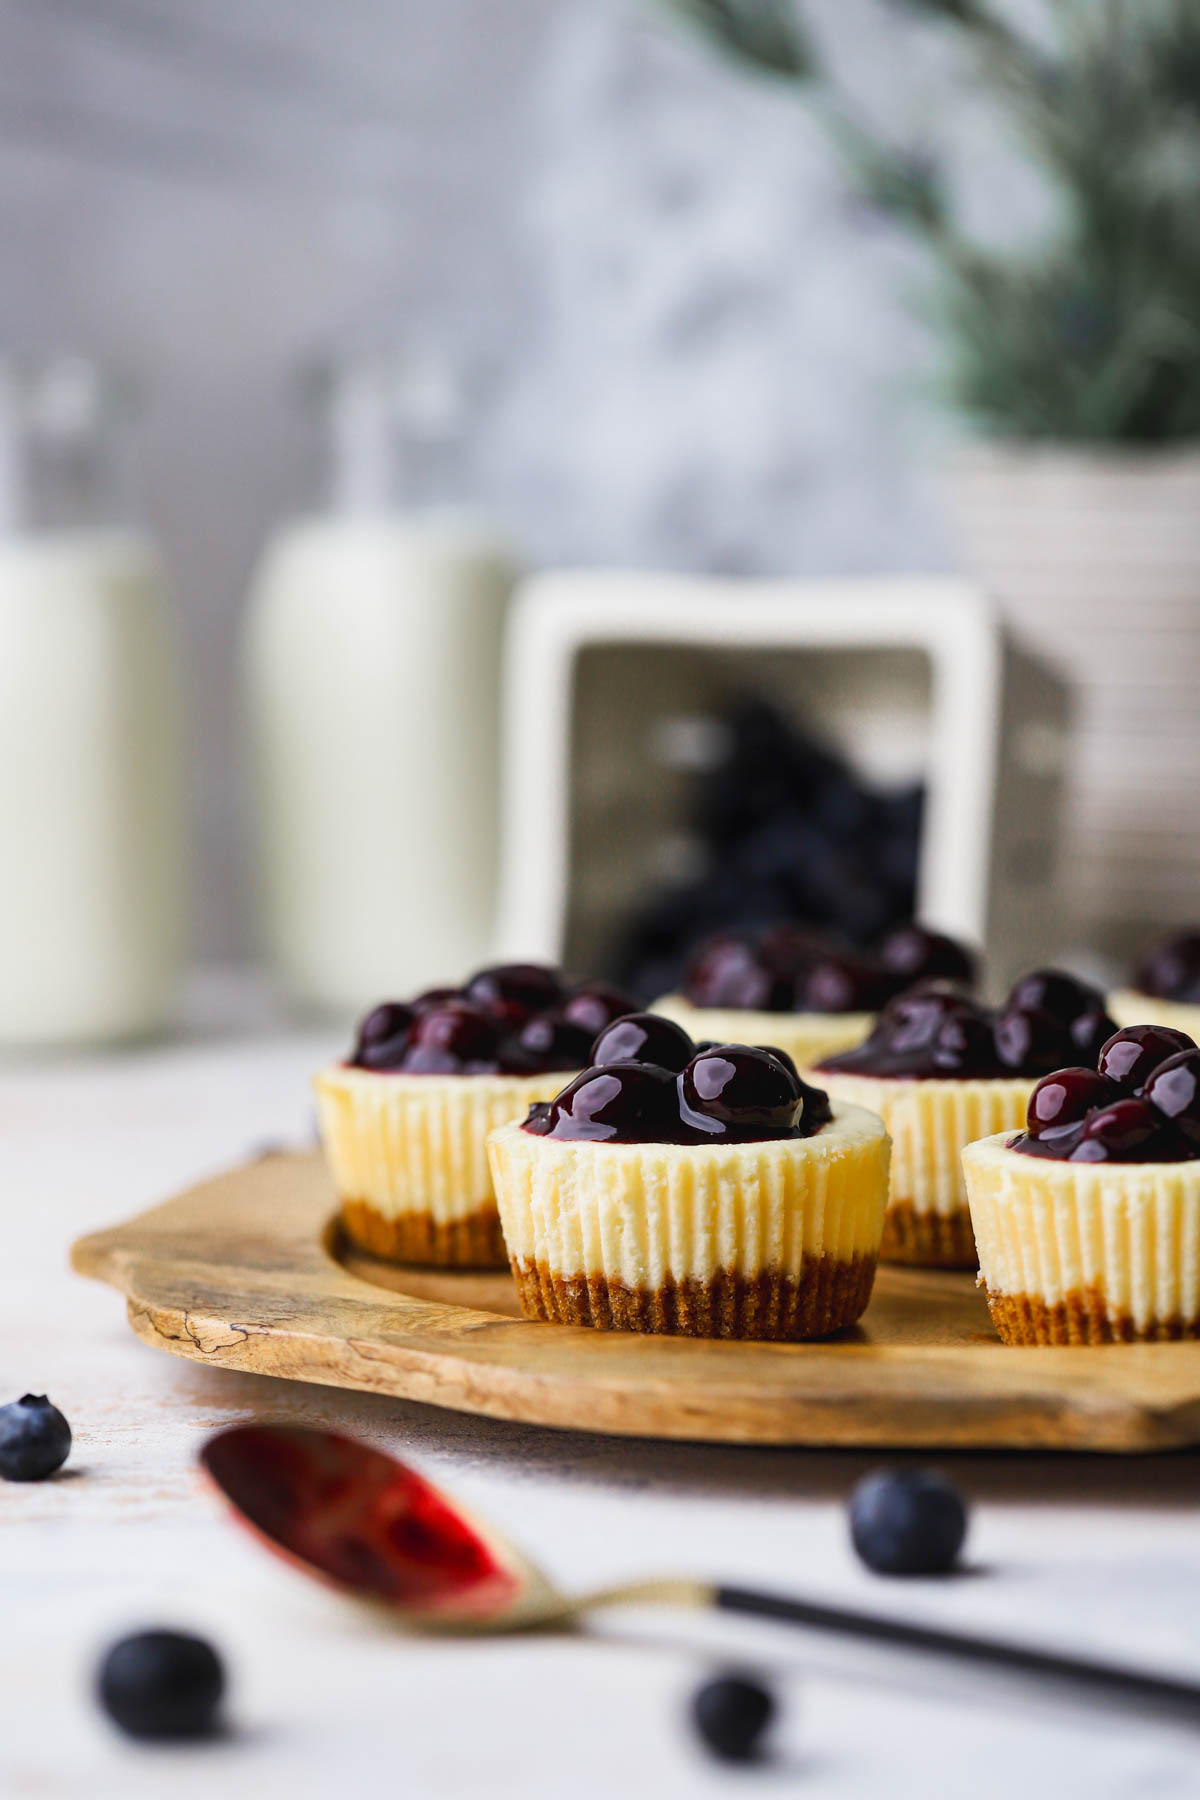 Mini blueberry cheesecake with homemade blueberry compote. 